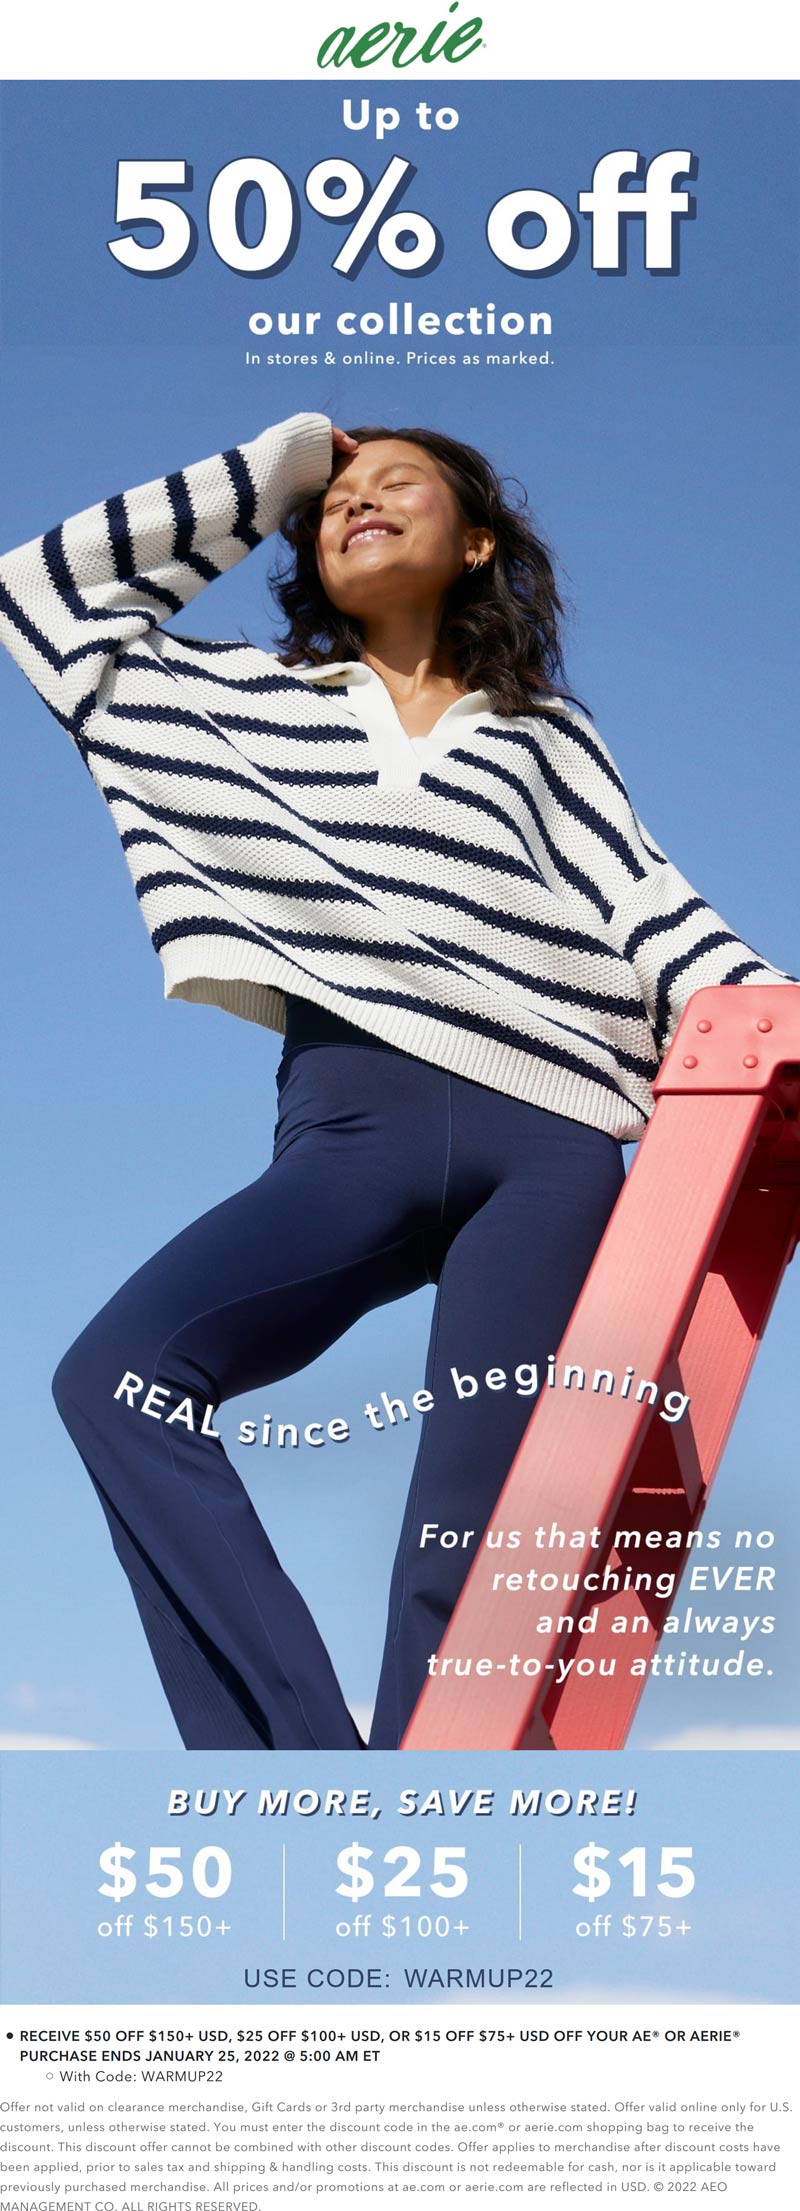 Aerie stores Coupon  $15-$50 off $75+ online at Aerie via promo code WARMUP22 #aerie 